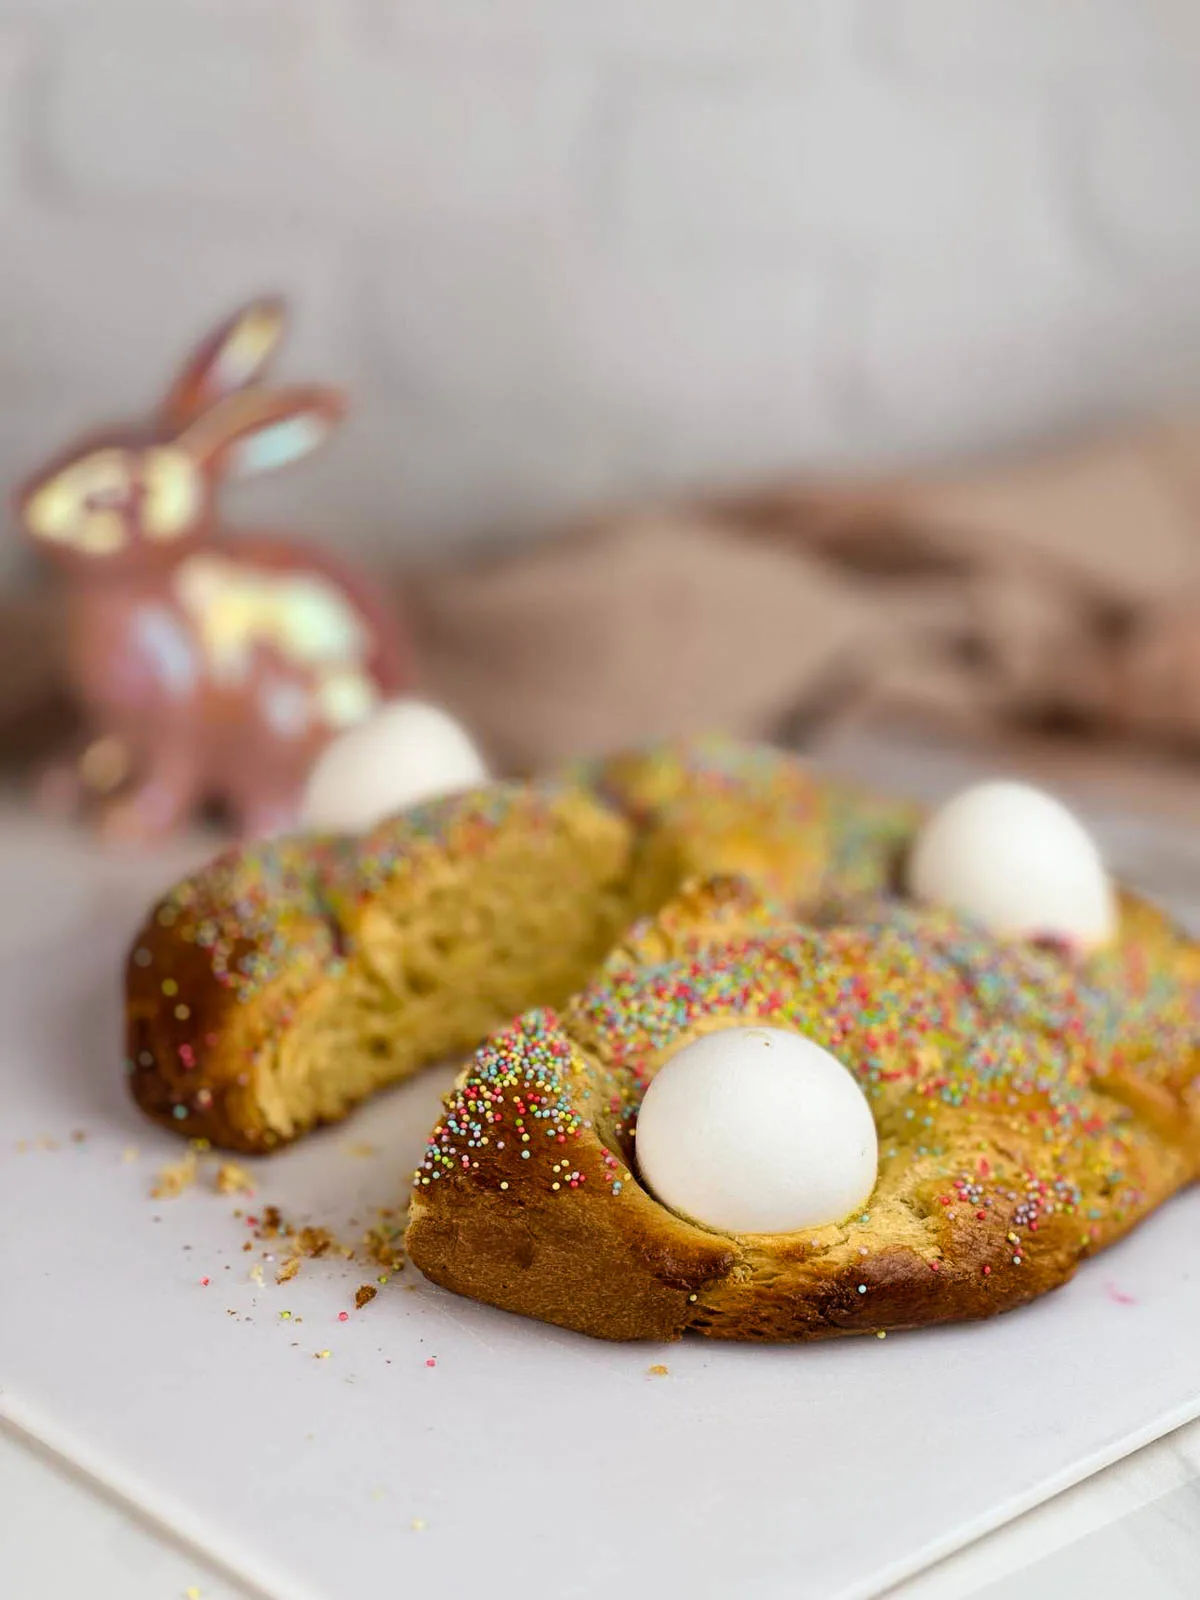 Italian Easter bread is a traditional slightly sweet brioche style perfect for the springtime holiday. This fluffy, braided bread dotted with eggs and sprinkles is a festive addition to your Easter brunch.